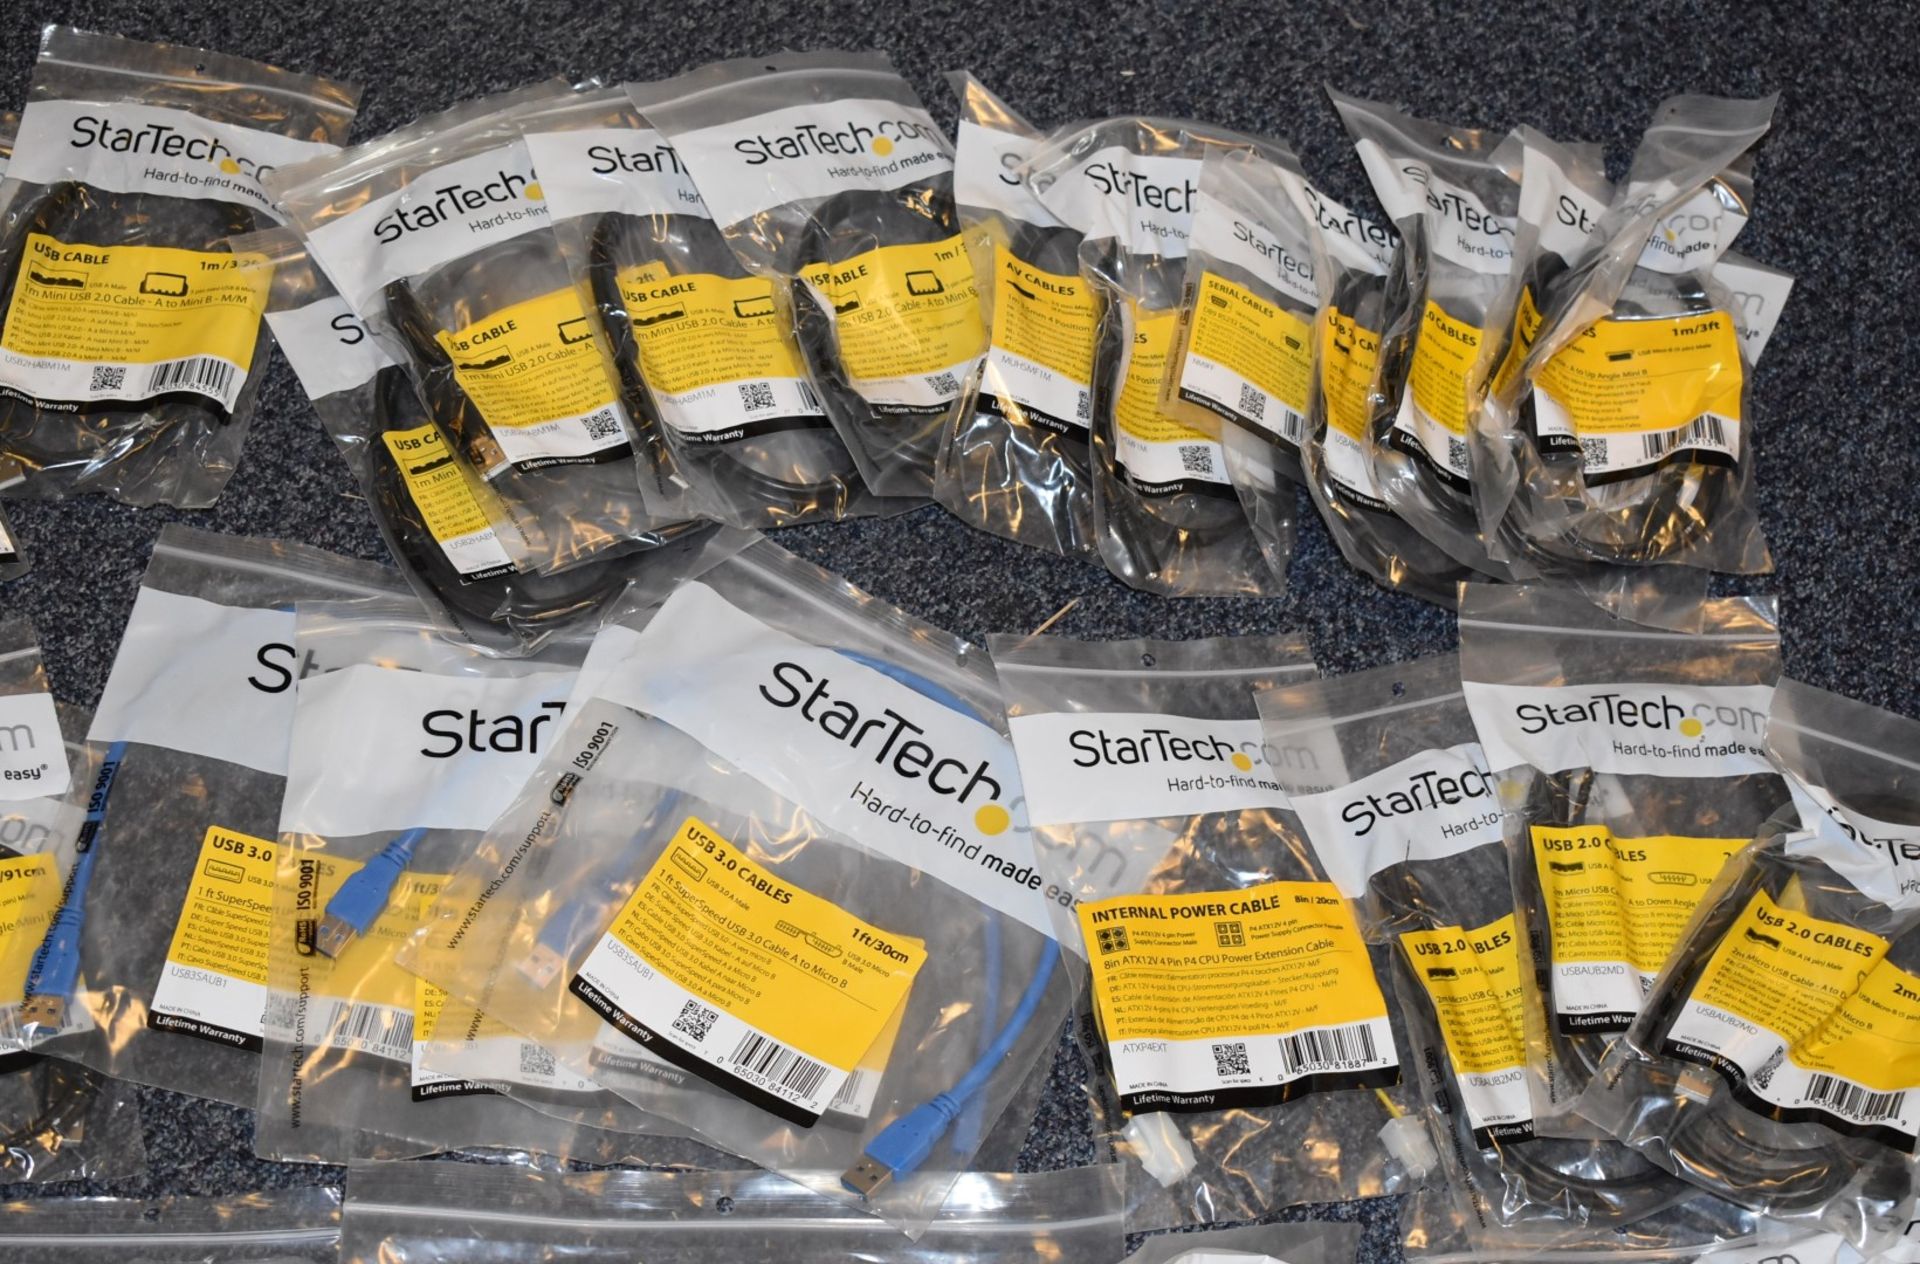 177 x Assorted StarTech Cables - Huge Lot in Original Packing - Various Cables Included - Image 36 of 50